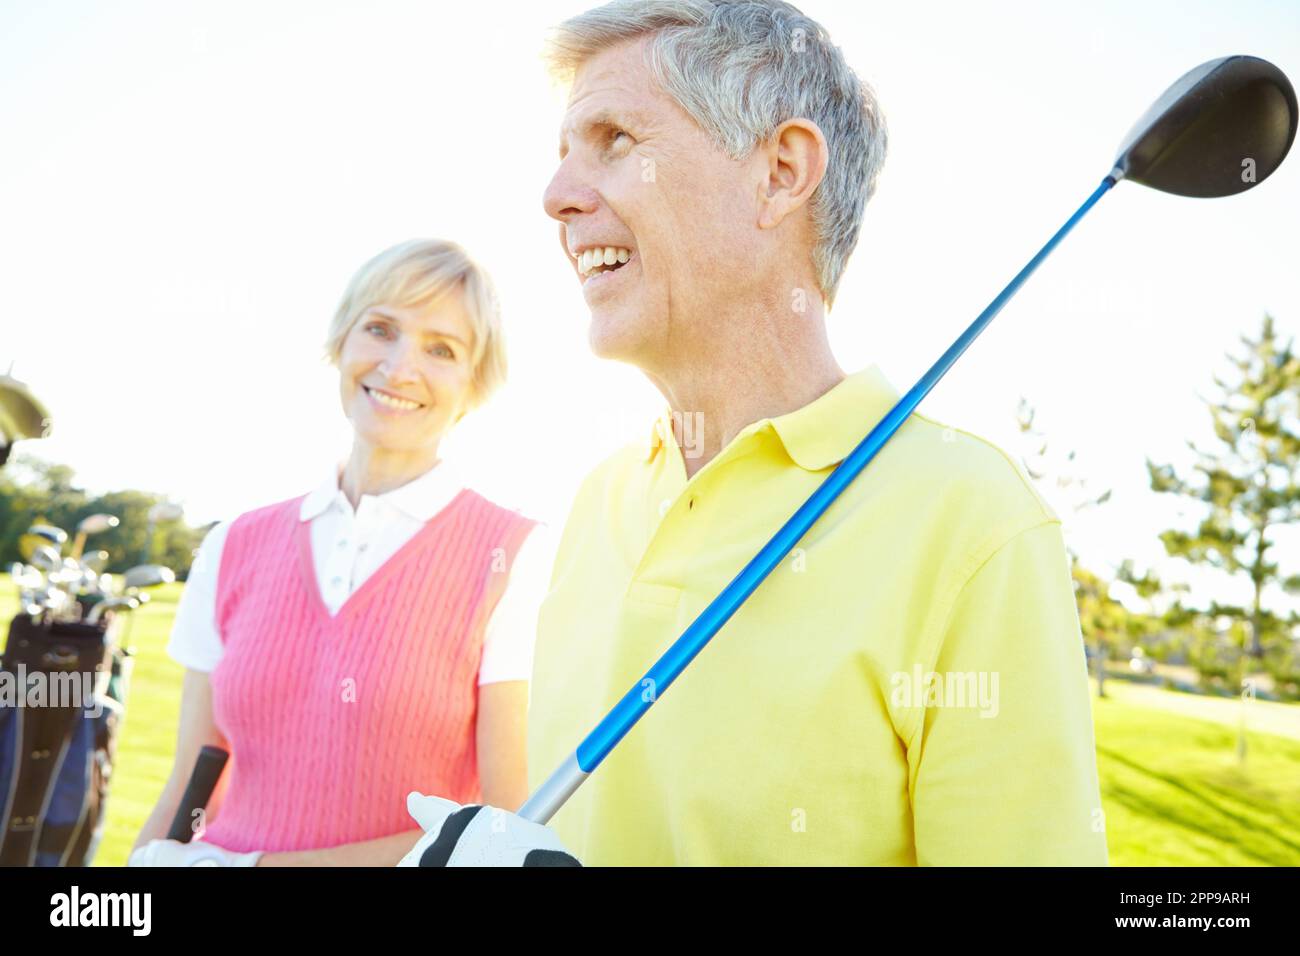 Golfing is their favorite hobby. Attractive elderly couple with their golf clubs over their shoulders. Stock Photo